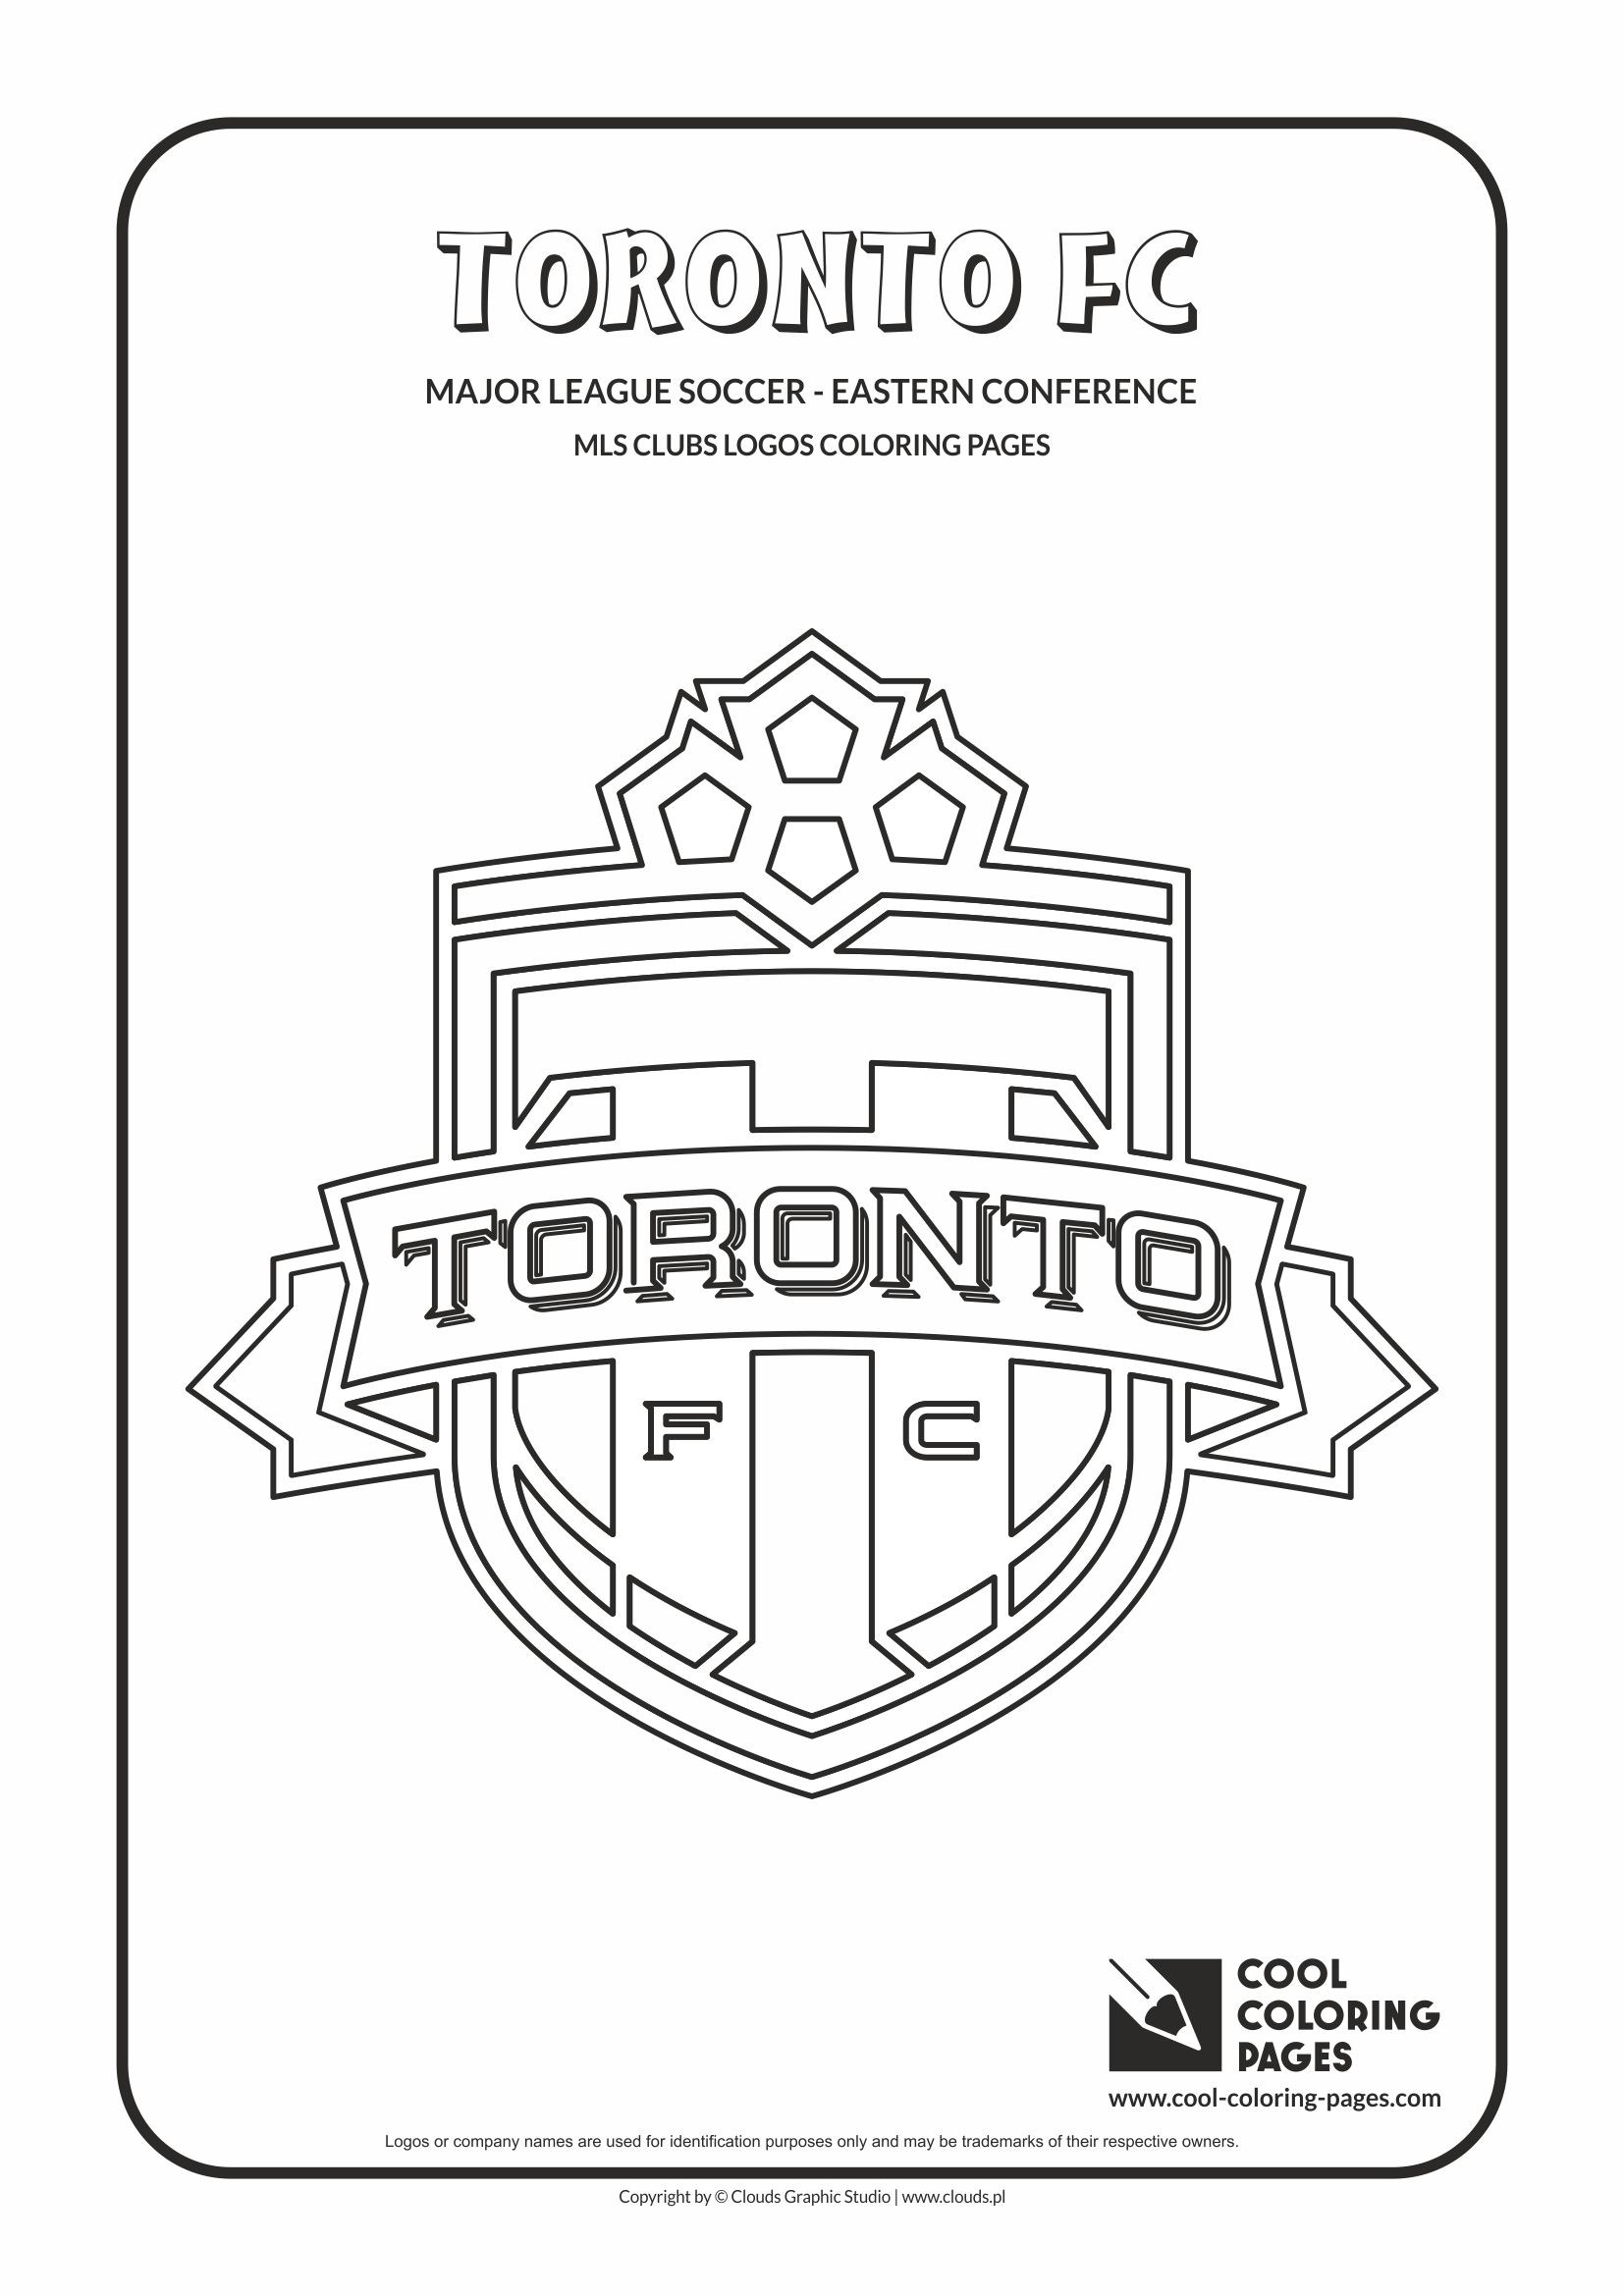 Coloring page with Toronto FC logo